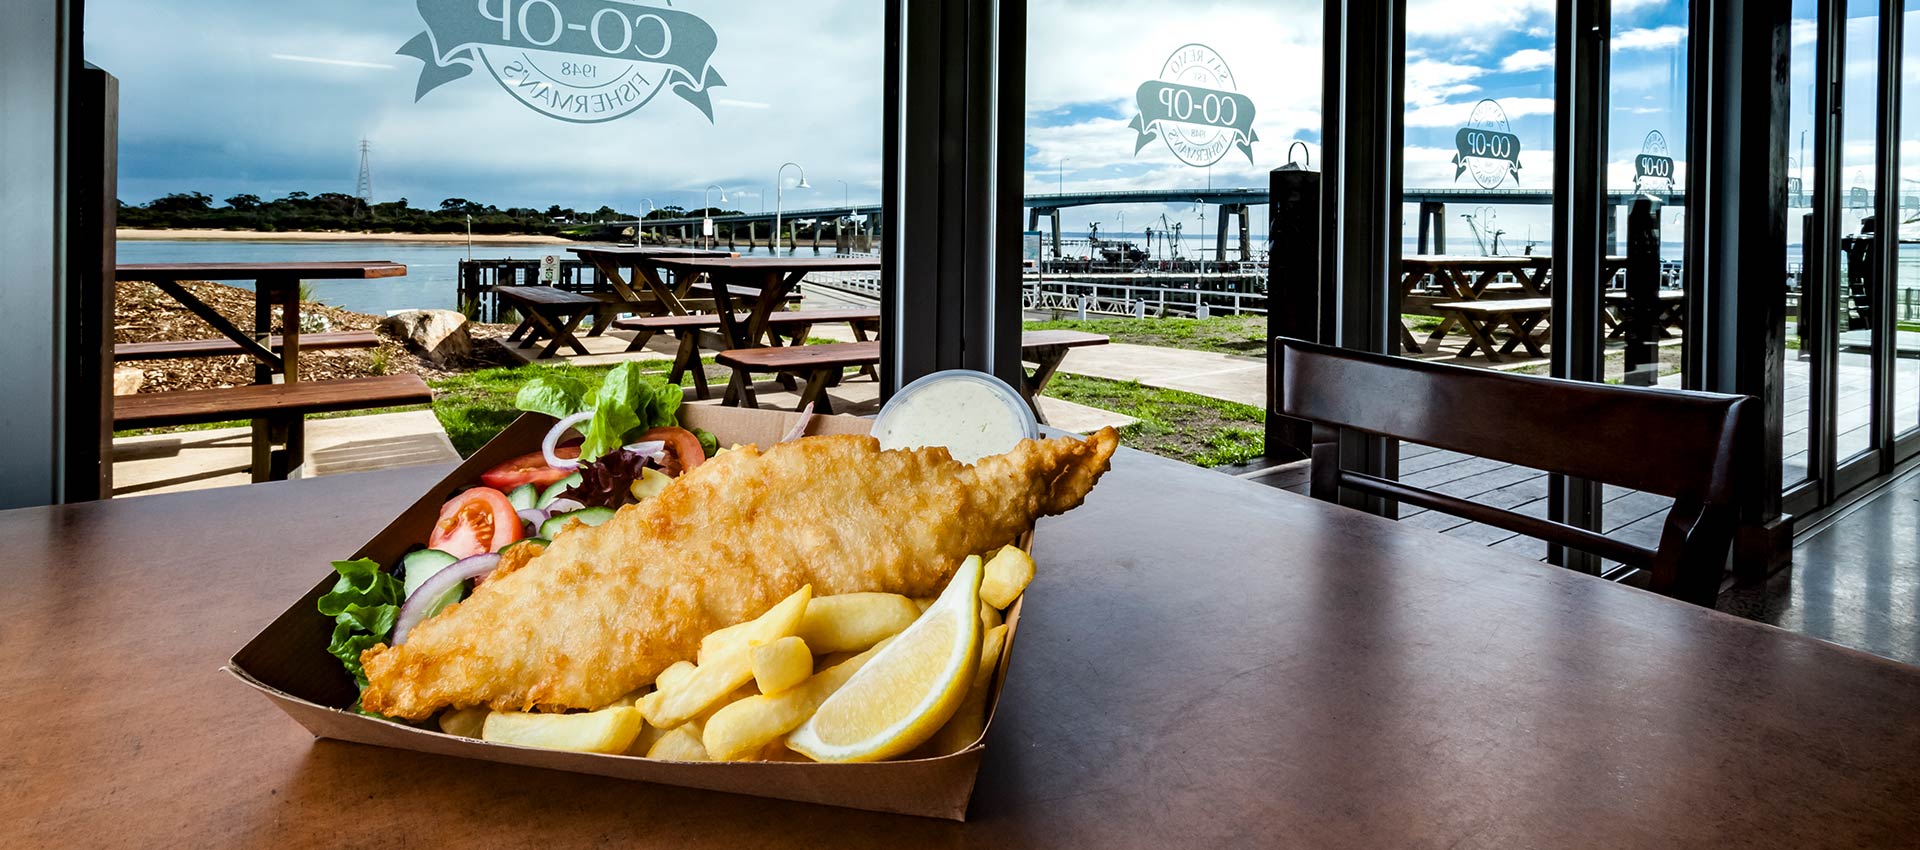 Places to eat San Remo? Discover the best Fish and Chips at San Remo Fisherman's Co-op. Order online today